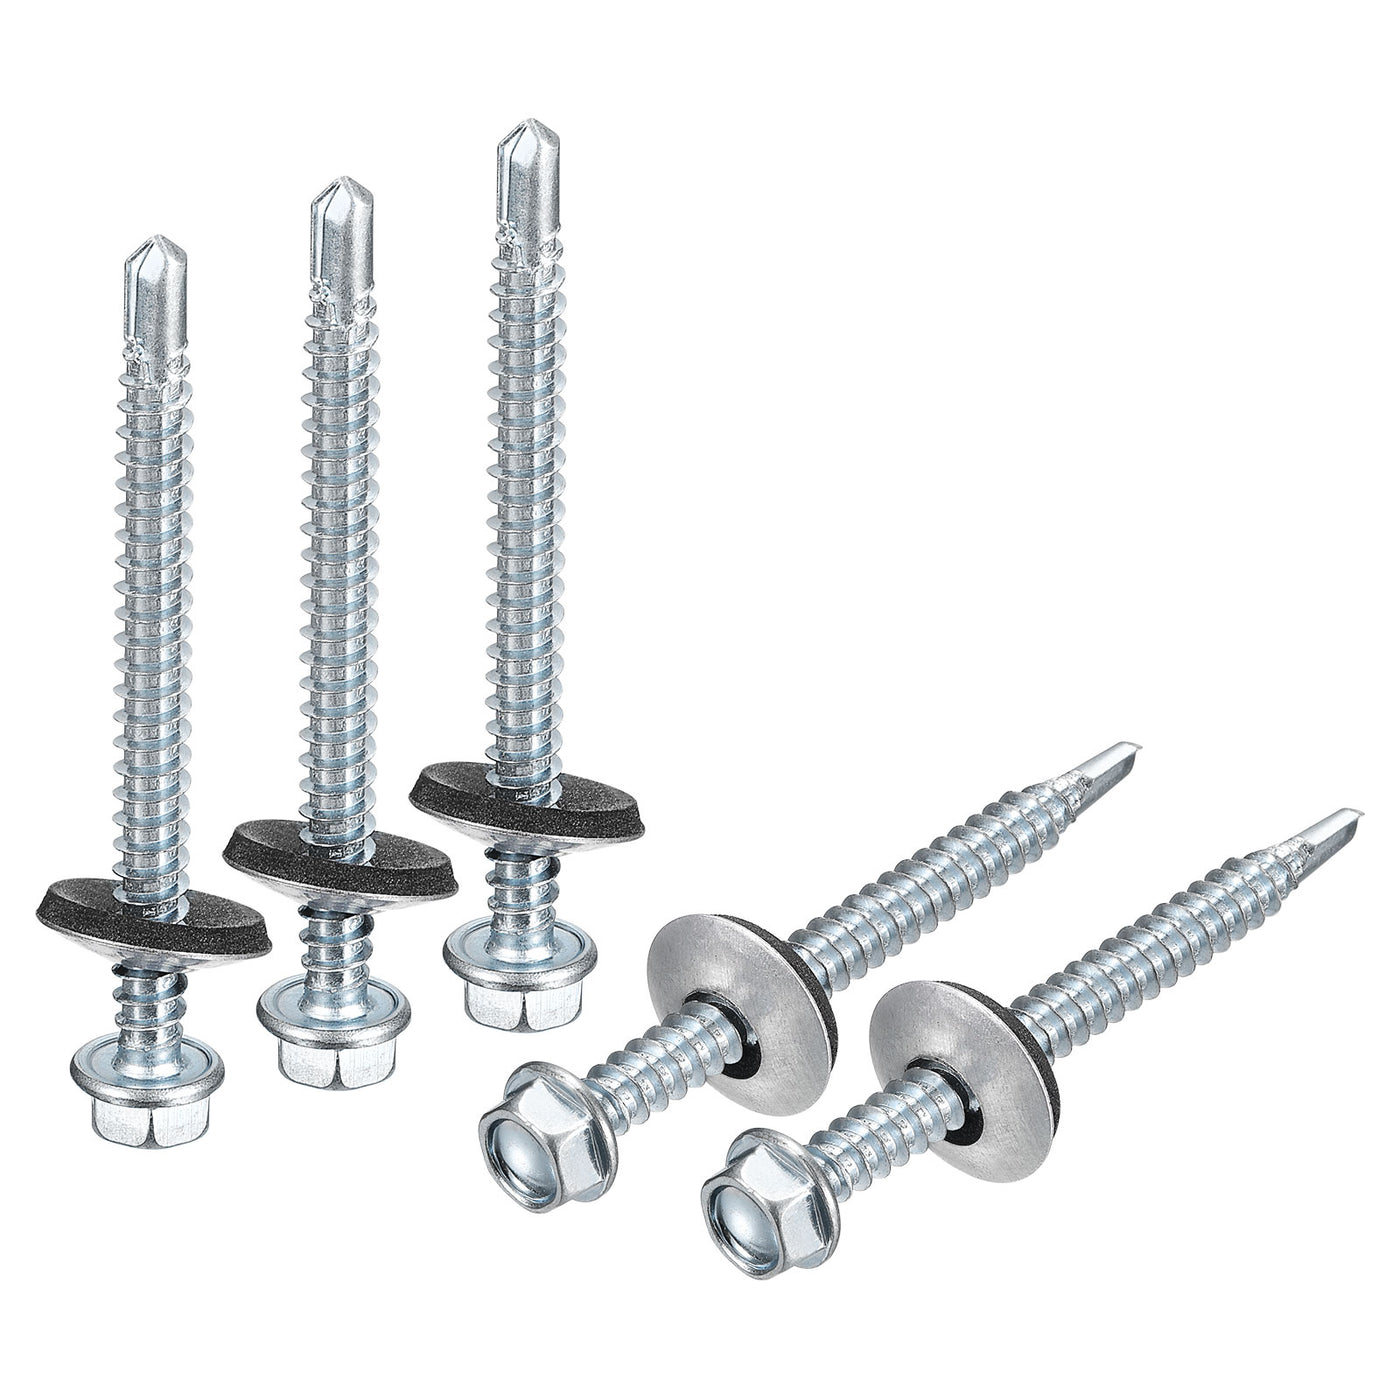 uxcell Uxcell #12 x 2-1/2" Self Drilling Screws, 25pcs Roofing Screws with EPDM Washer